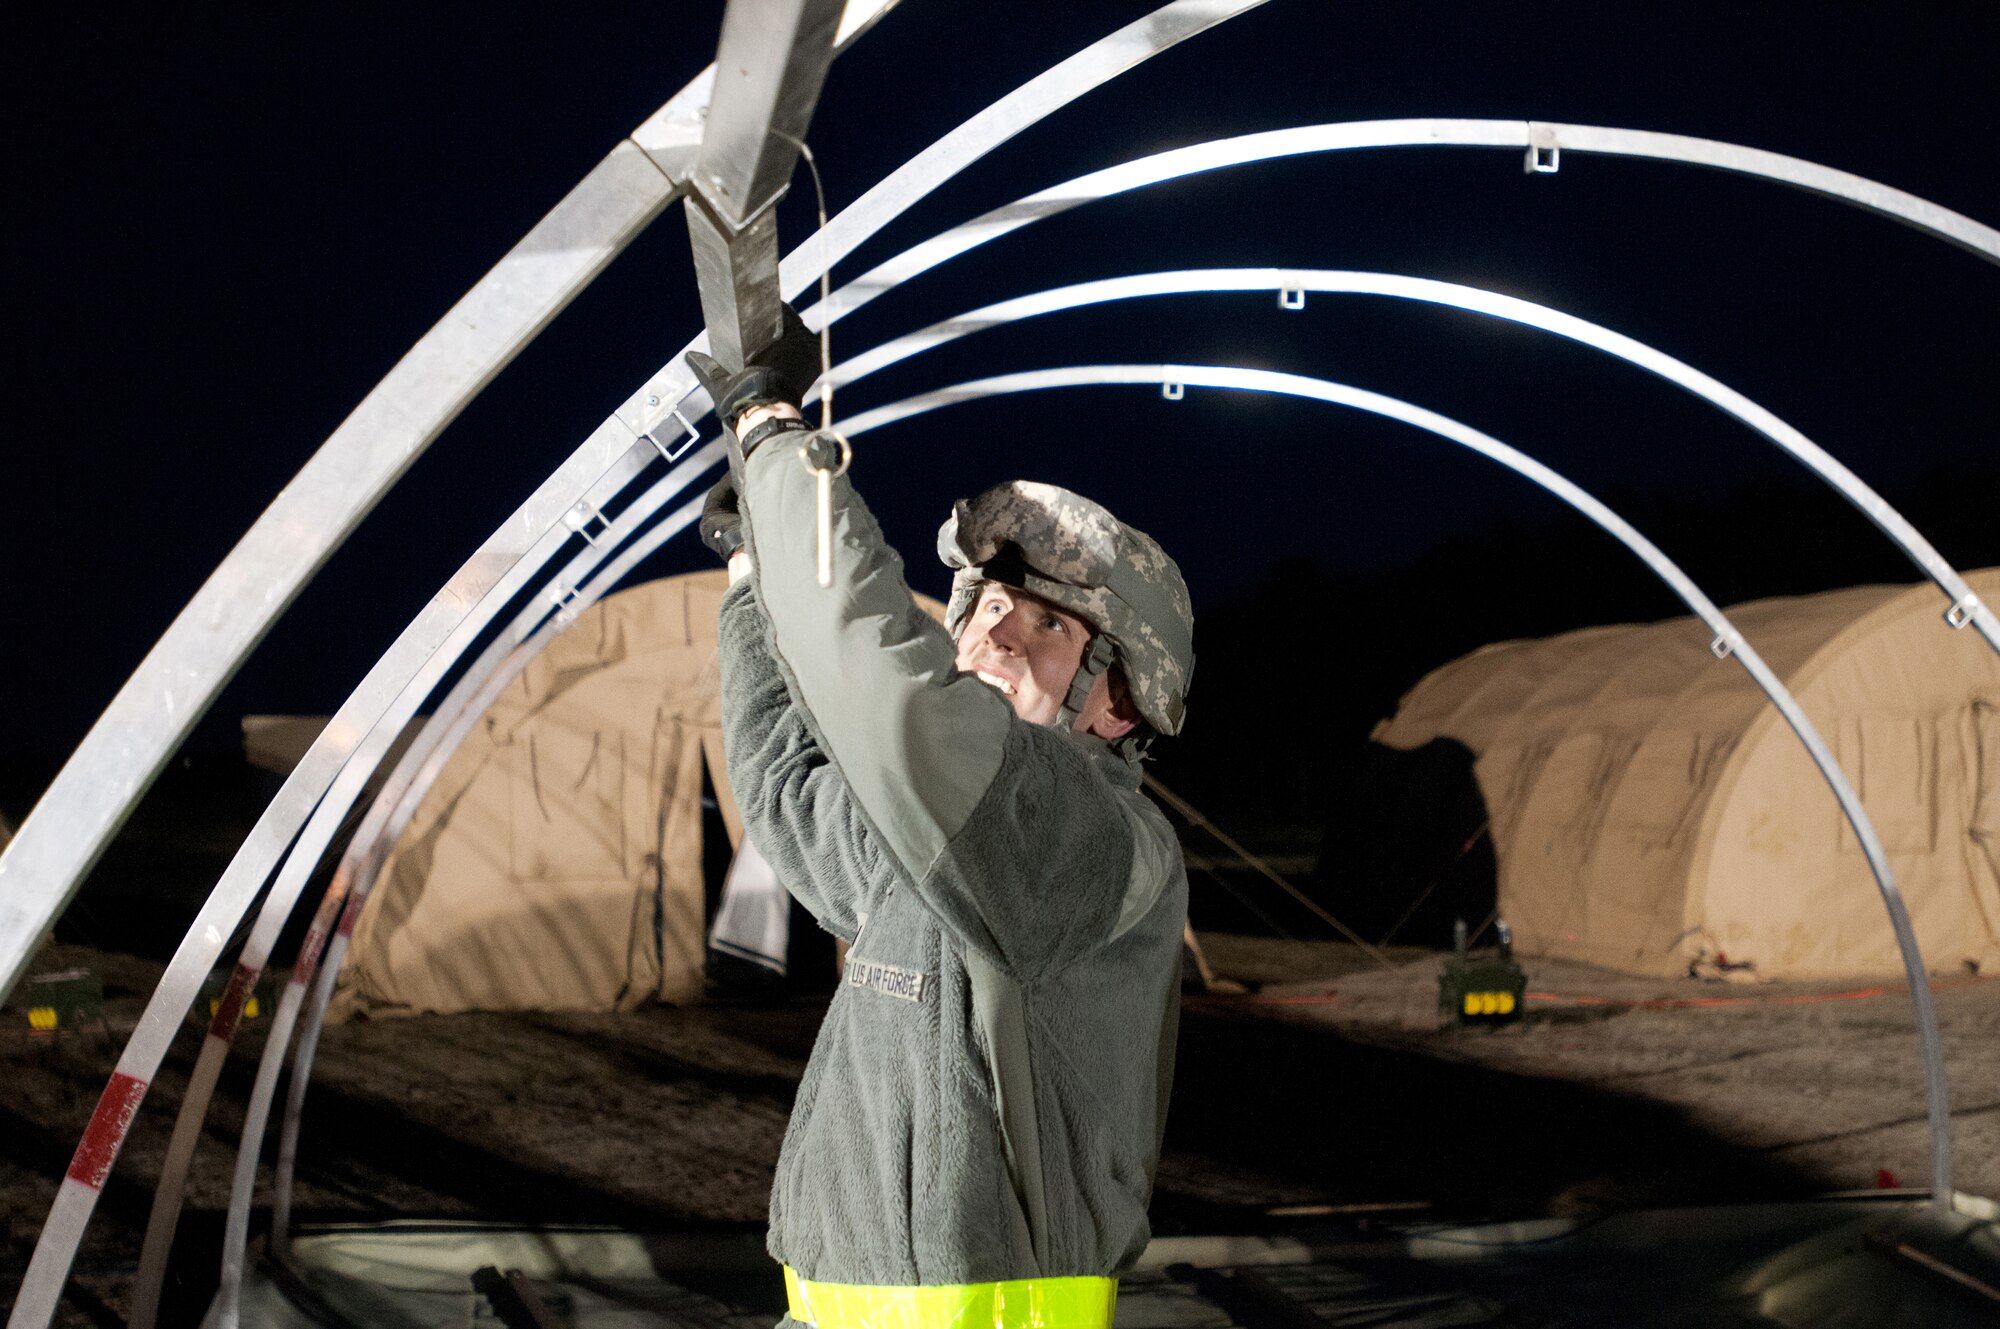 1st Lt. Kevin Eilers of the Kentucky Air National Guard's 123rd Contingency Response Group sets up an Alaskan Shelter tent at Joint Base McGuire-Dix-Lakehurst, N.J., March 26, 2012, during Exercise Eagle Flag. More than 80 Airmen from the Kentucky Air Guard have joined forces with over 50 active-duty Army troops and Air Guardsmen from New Jersey and Mississippi to establish an aerial port at Lakehurst Naval Air Engineering Station within 24 hours of arrival. Inspectors from U.S. Transportation Command will evaluate the performance of the Kentucky unit during the exercise. (U.S. Air Force photo by Master Sgt. Phil Speck)